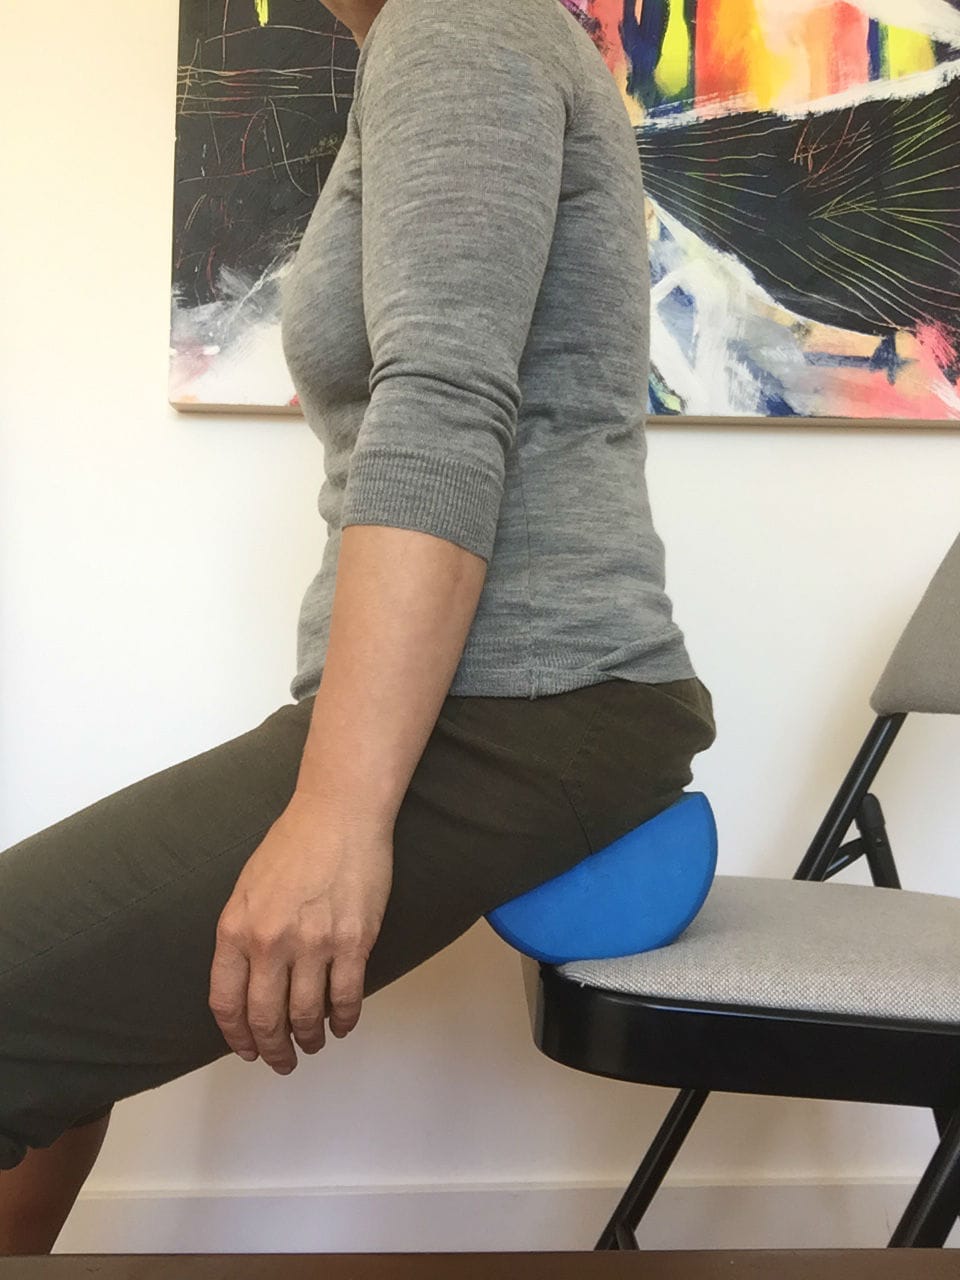 Sitting with propped neutral pelvis